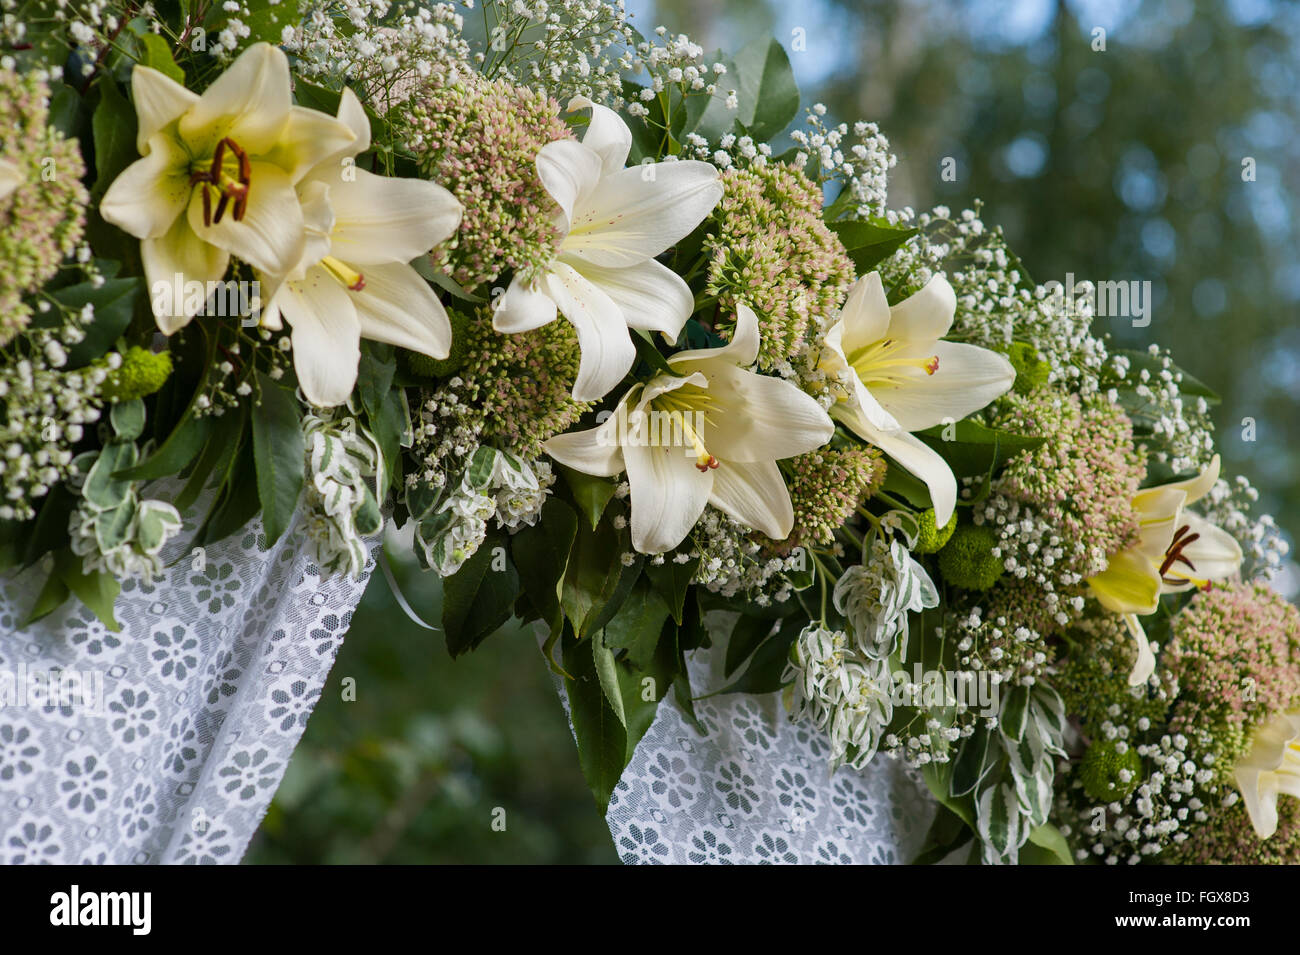 beautiful decorated wedding arch for the ceremony outdoor Stock Photo